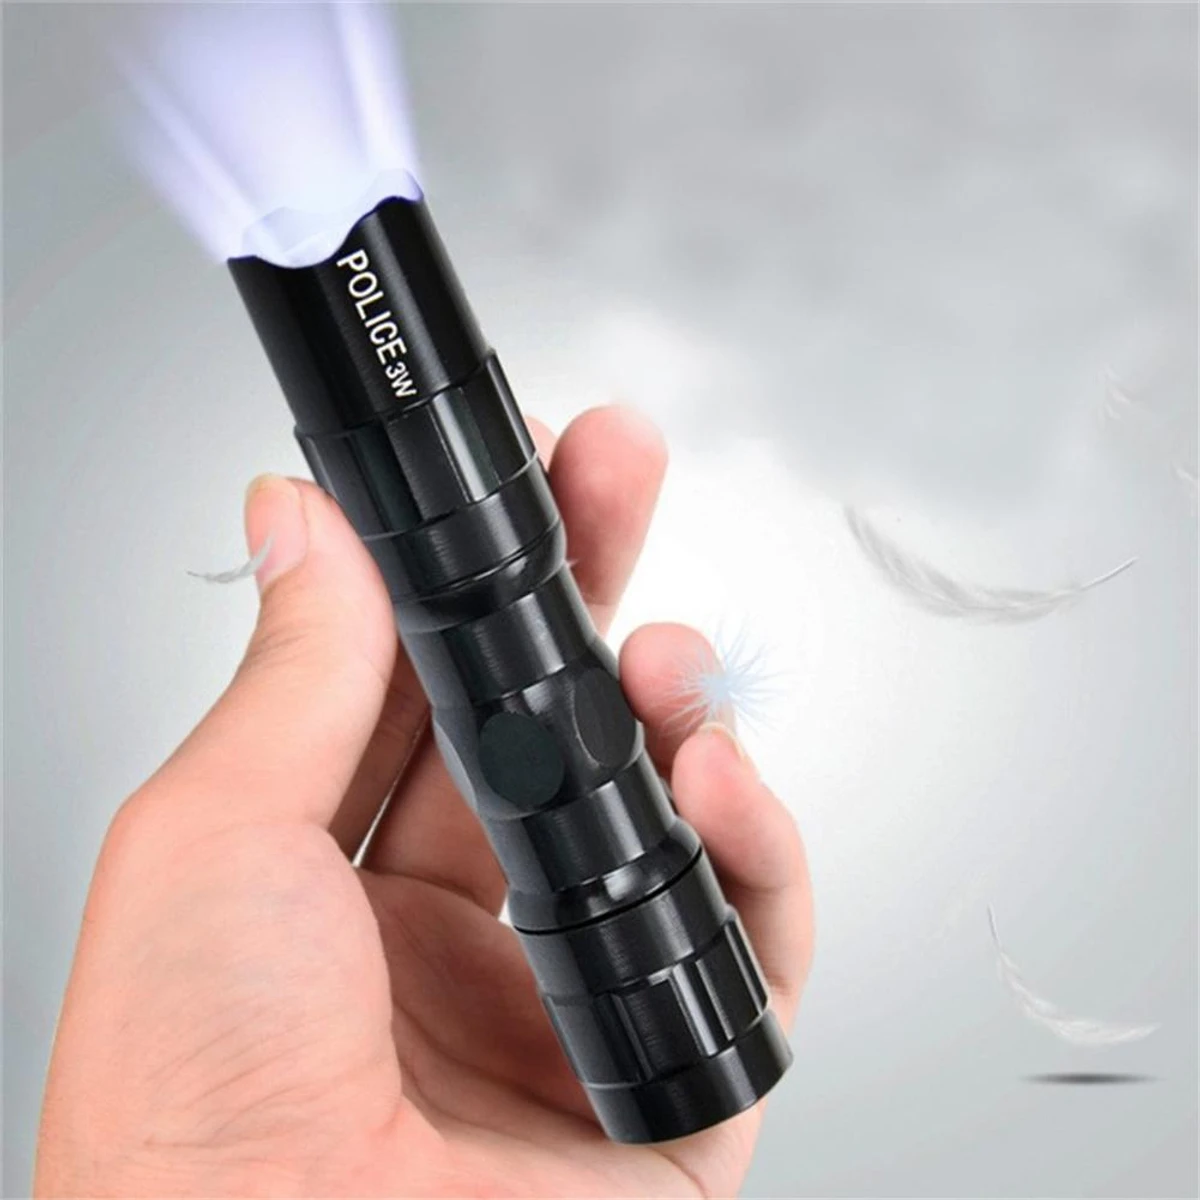 Portable Flashlight Torch 3W Aluminum Alloy LED Lighting Lamp On For Outdoor Camping Hiking Waterproof Powerful Light Torch